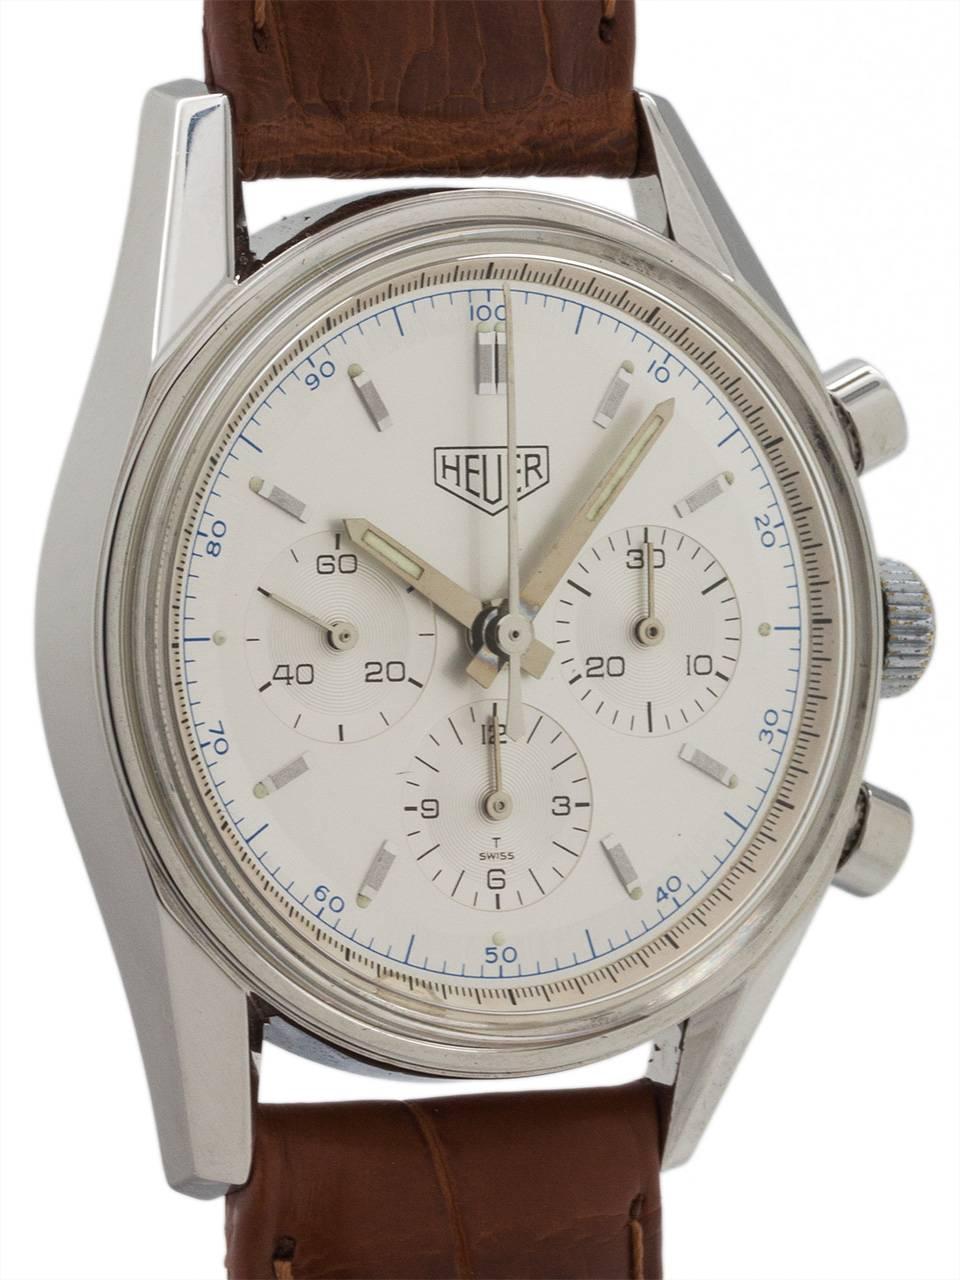 
Heuer circa 1990’s reissue of the classic 1964 Carrera 3 registers manual wind chronograph in excellent preowned condition. Model ref # CS3110, featuring 34 X 38mm case with screw down case back, and round pushers, true to the 1964 original with